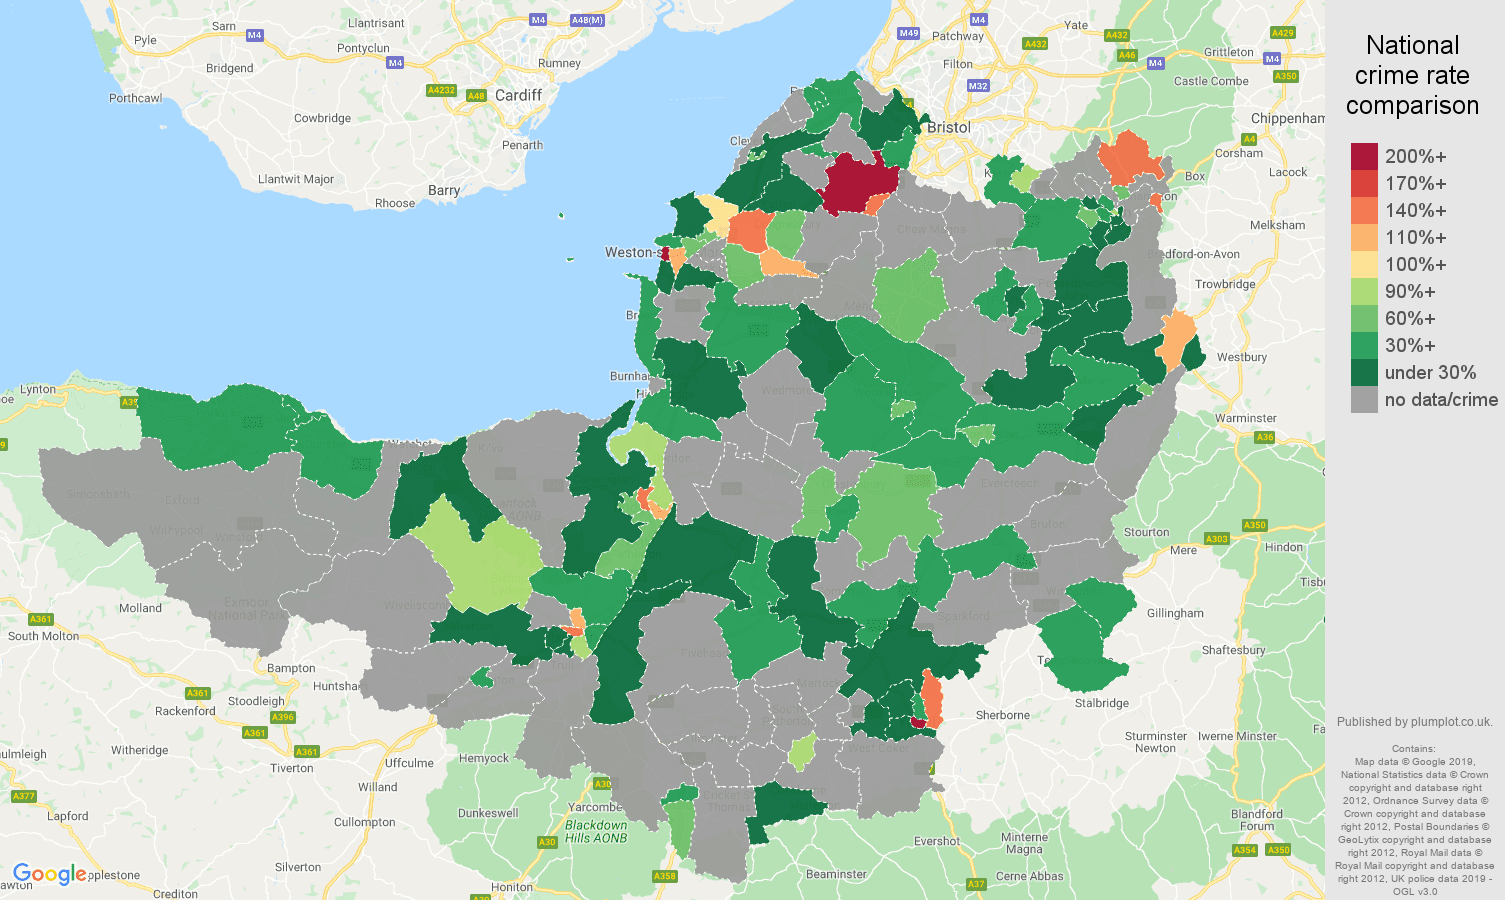 Somerset possession of weapons crime rate comparison map